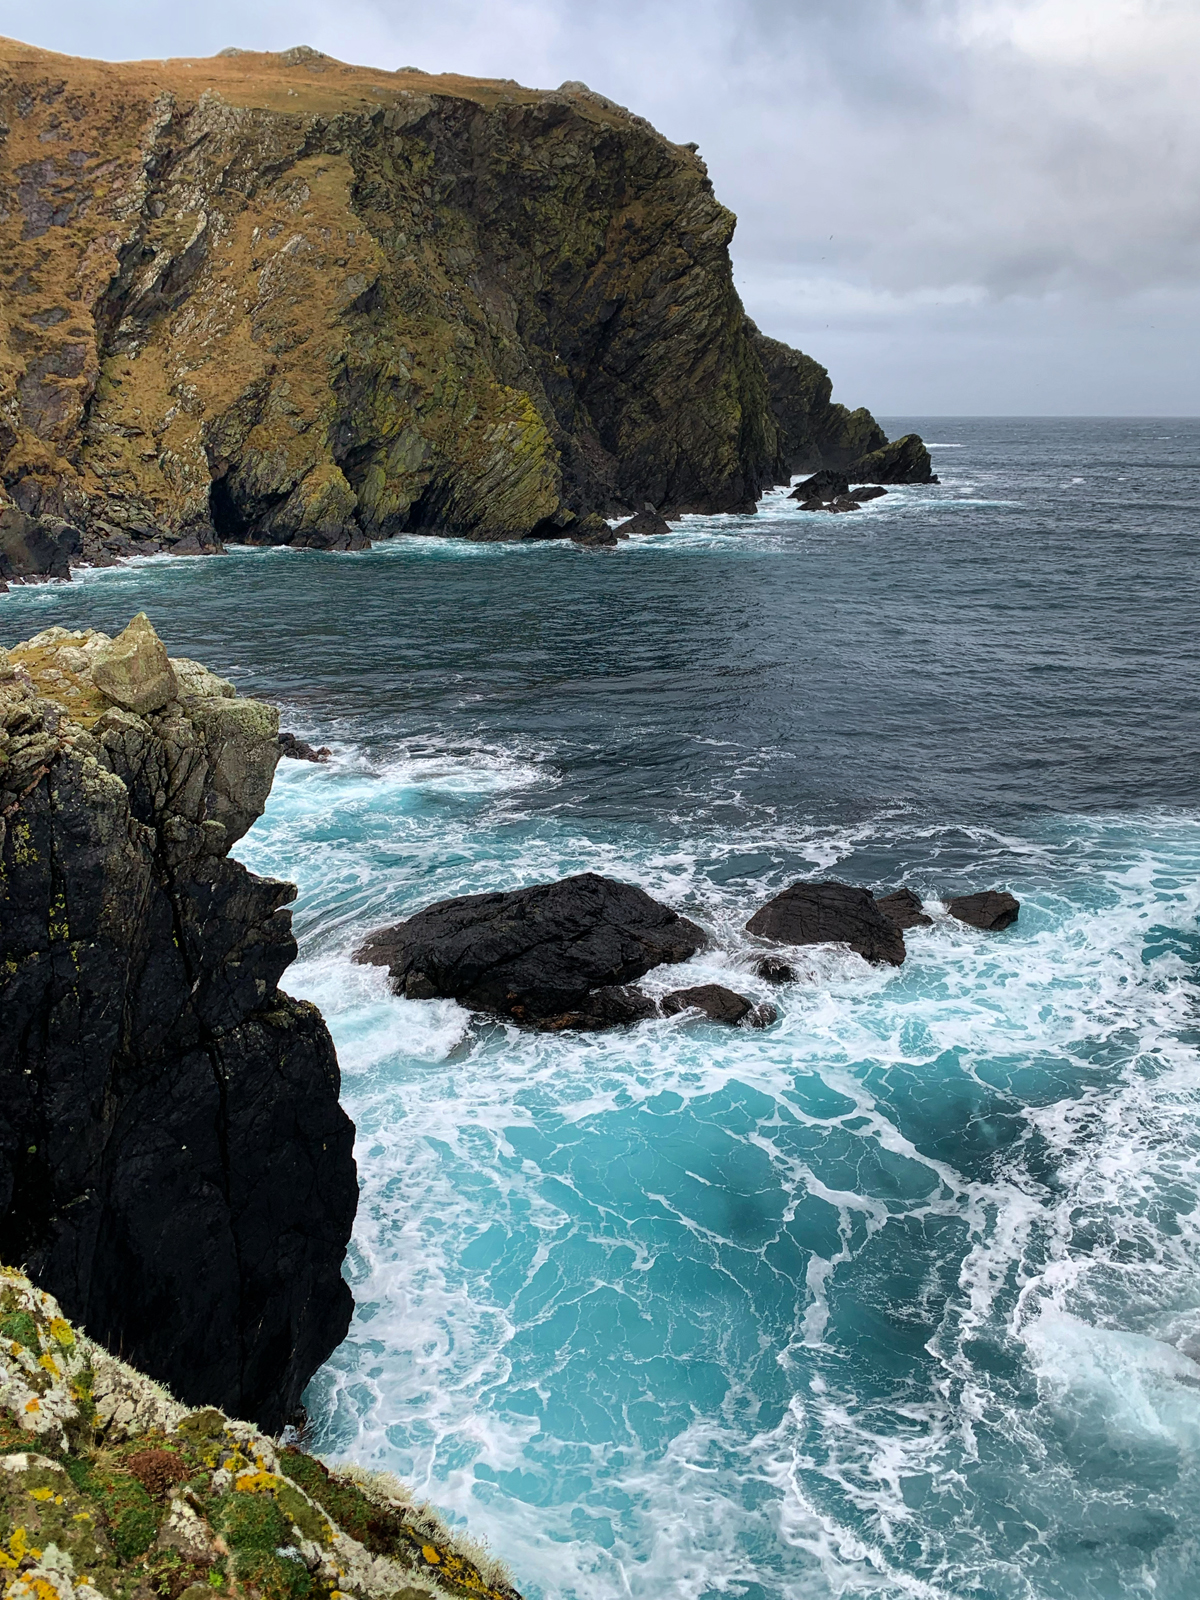 Photo of the cliffs at The Face of Neeans with a vibrant blue sea at its base.